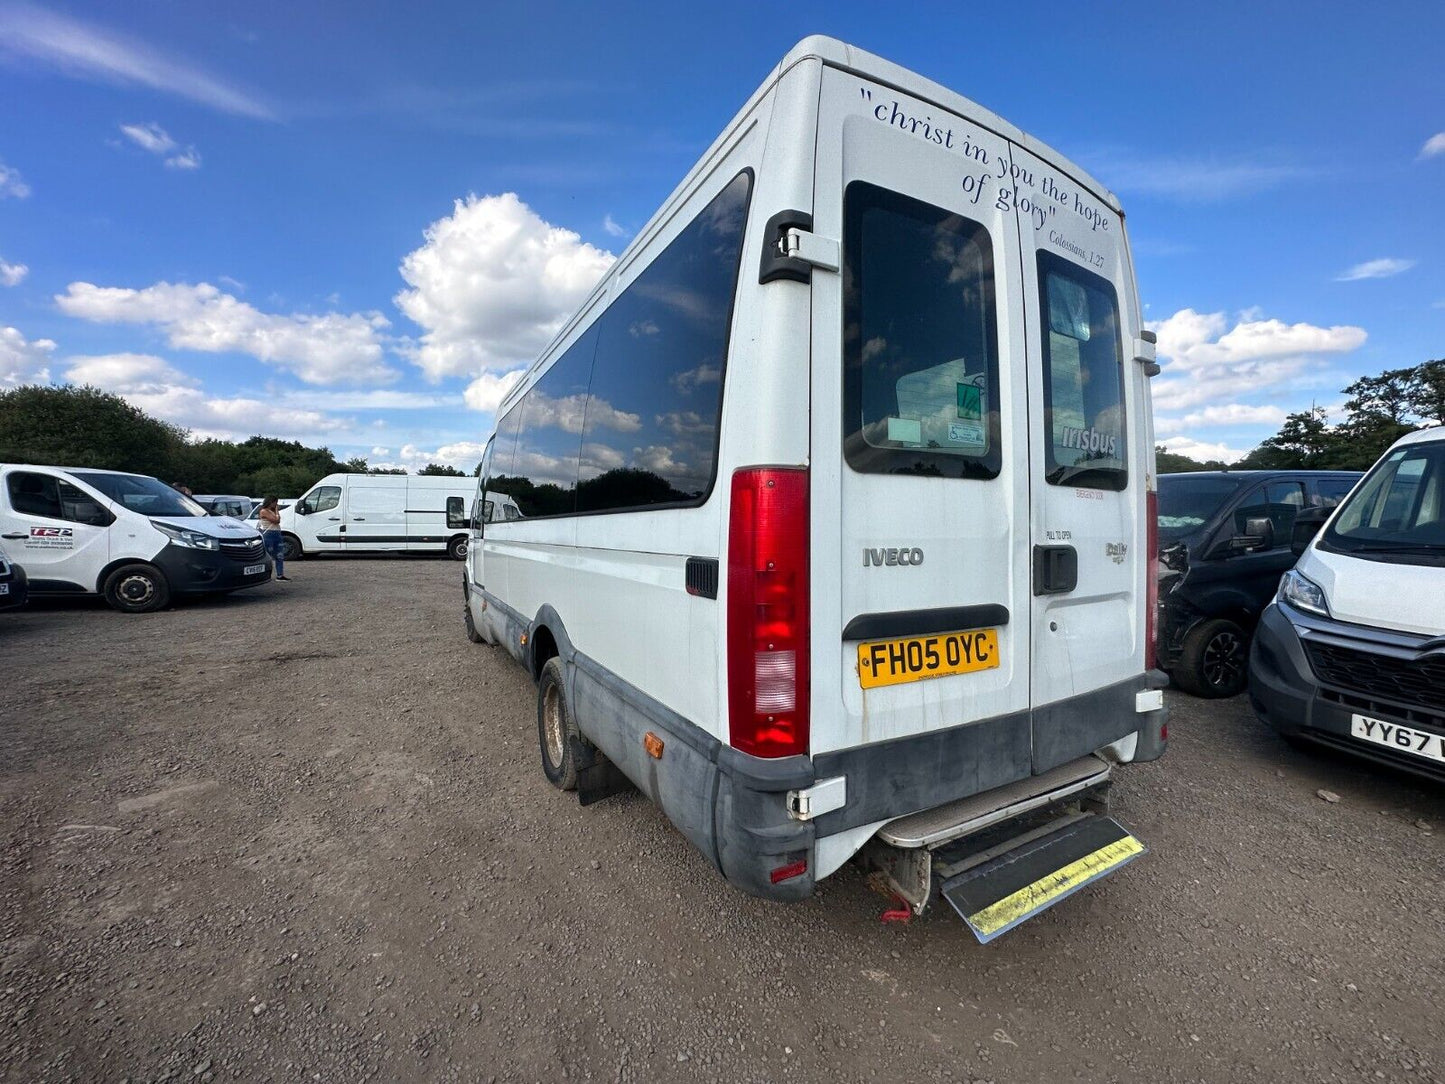 Bid on IRIS.BUS DAILY: LOW MILEAGE - 2 FORMER OWNERS - MOT SEP 2023- Buy &amp; Sell on Auction with EAMA Group